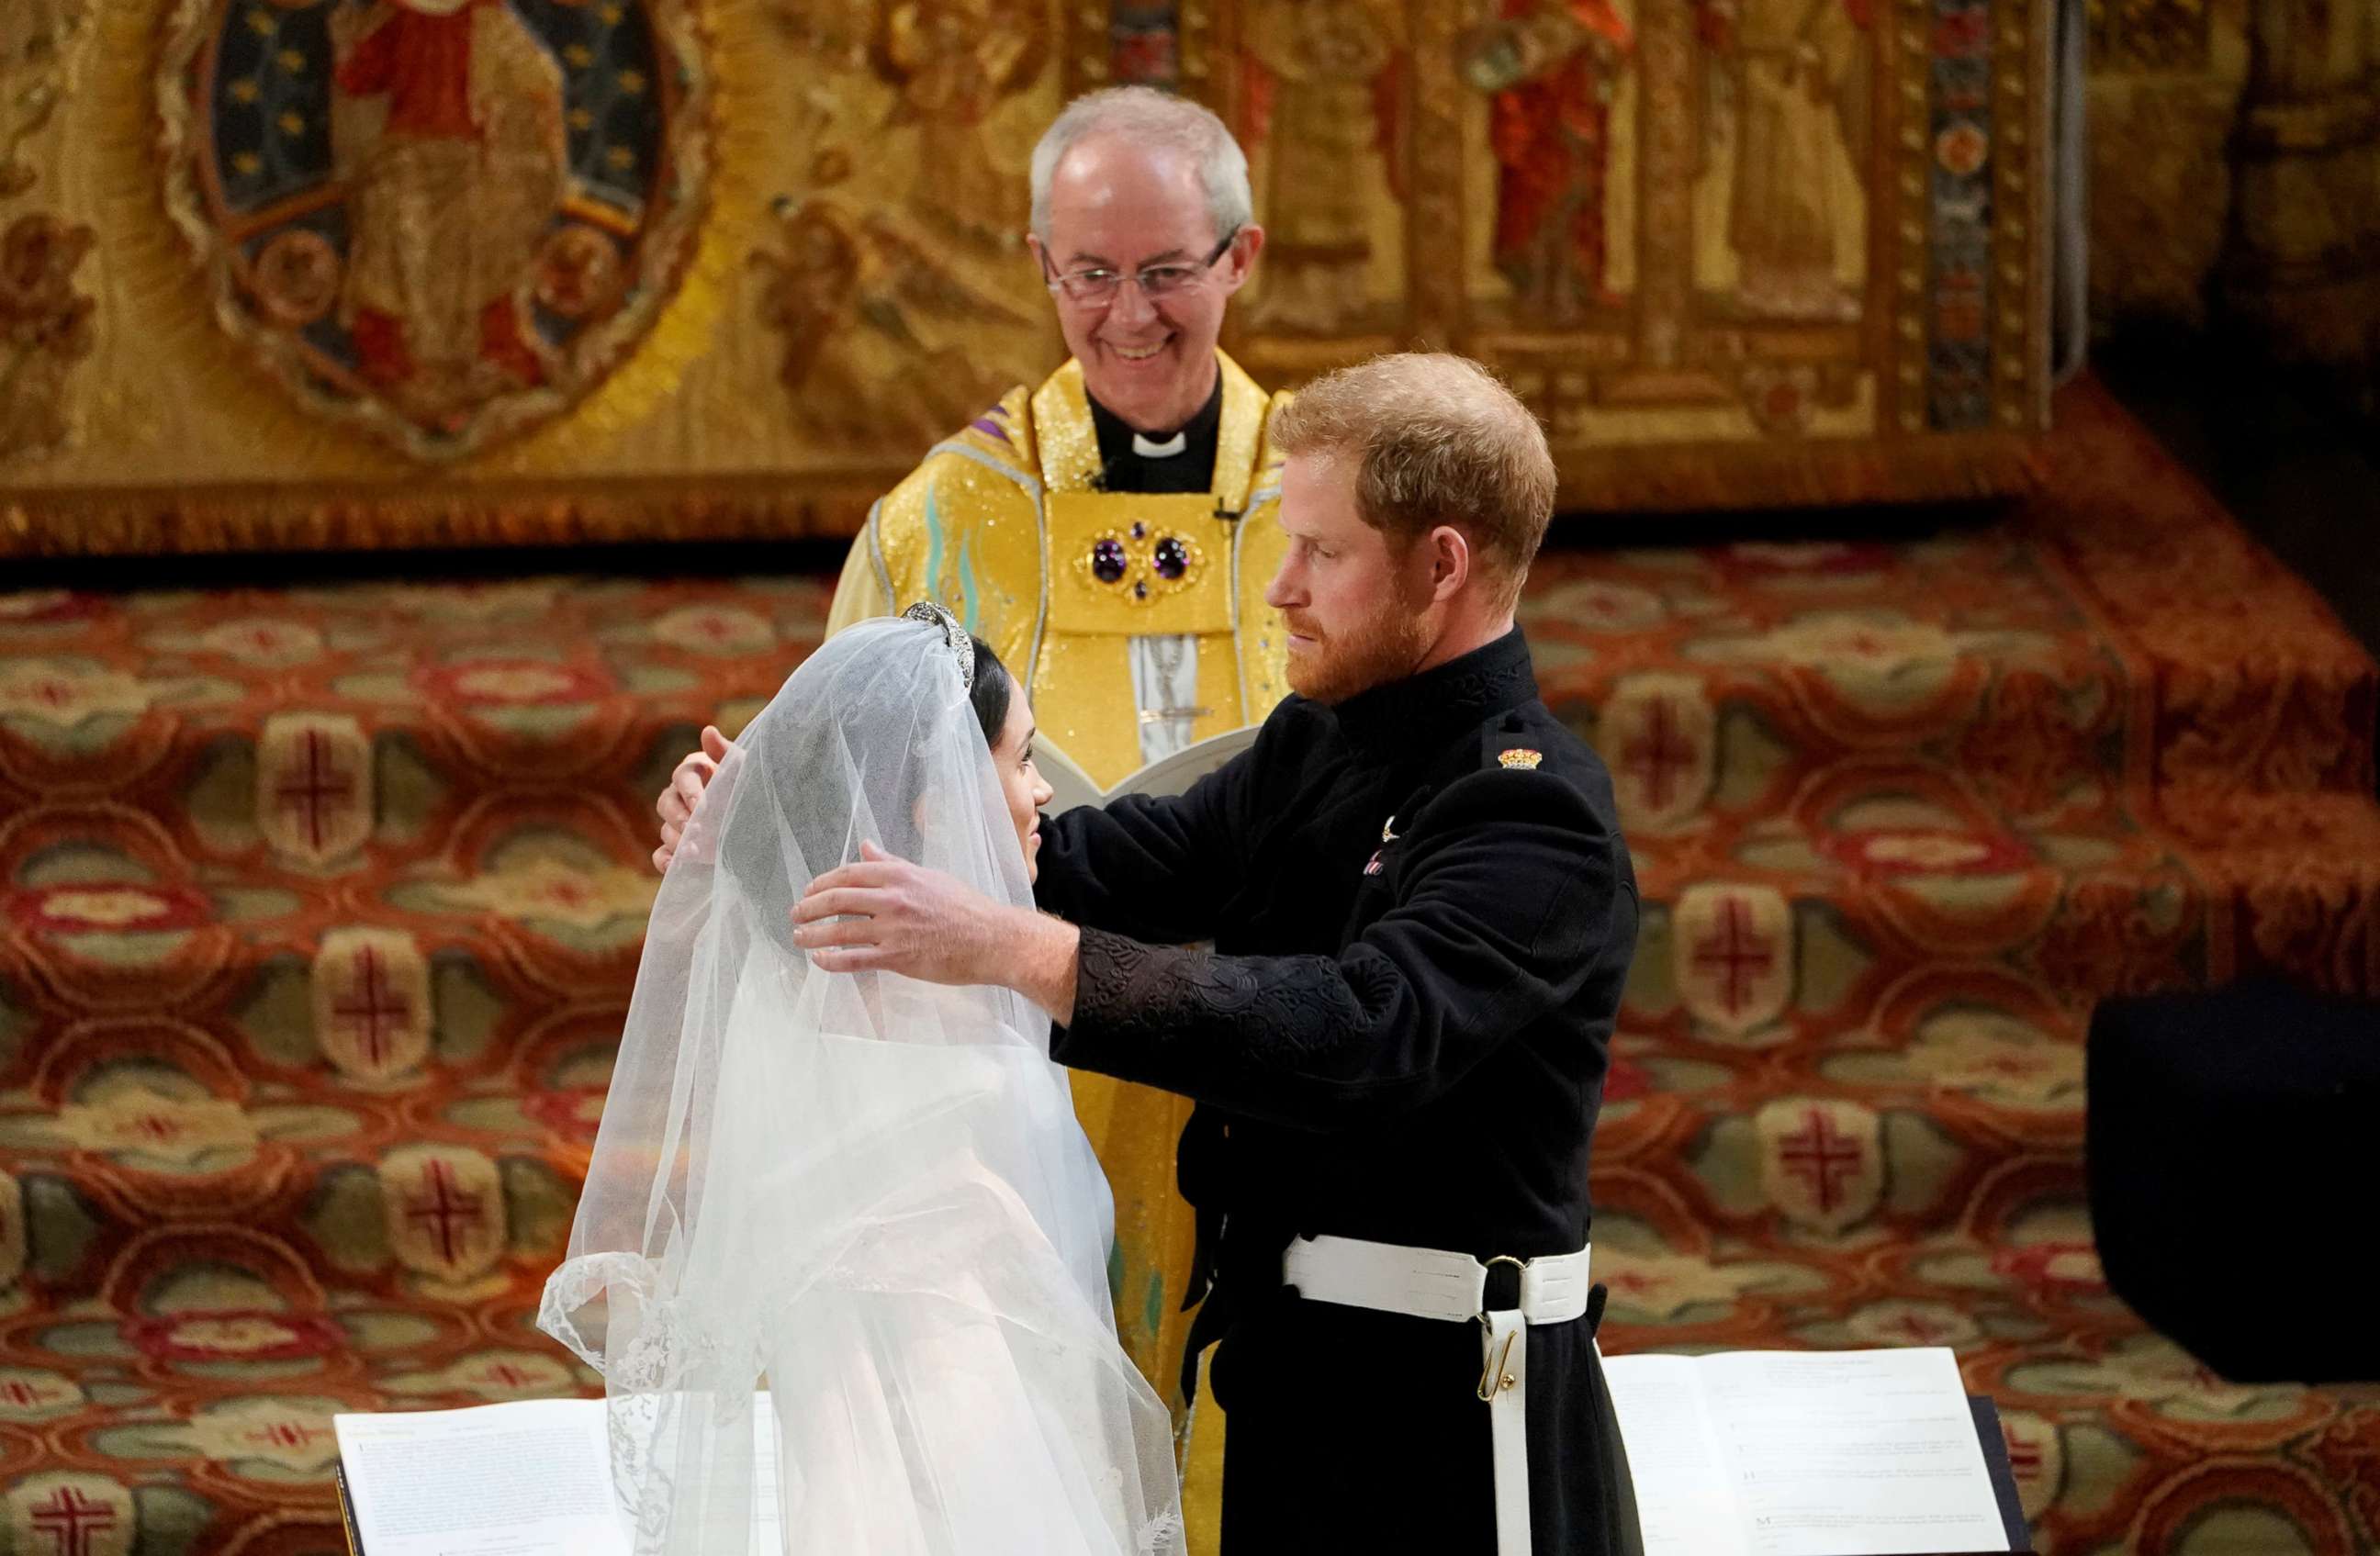 PHOTO: Prince Harry and Meghan Markle in St George's Chapel at Windsor Castle during their wedding service, conducted by the Archbishop of Canterbury Justin Welby in Windsor, Britain, May 19, 2018.